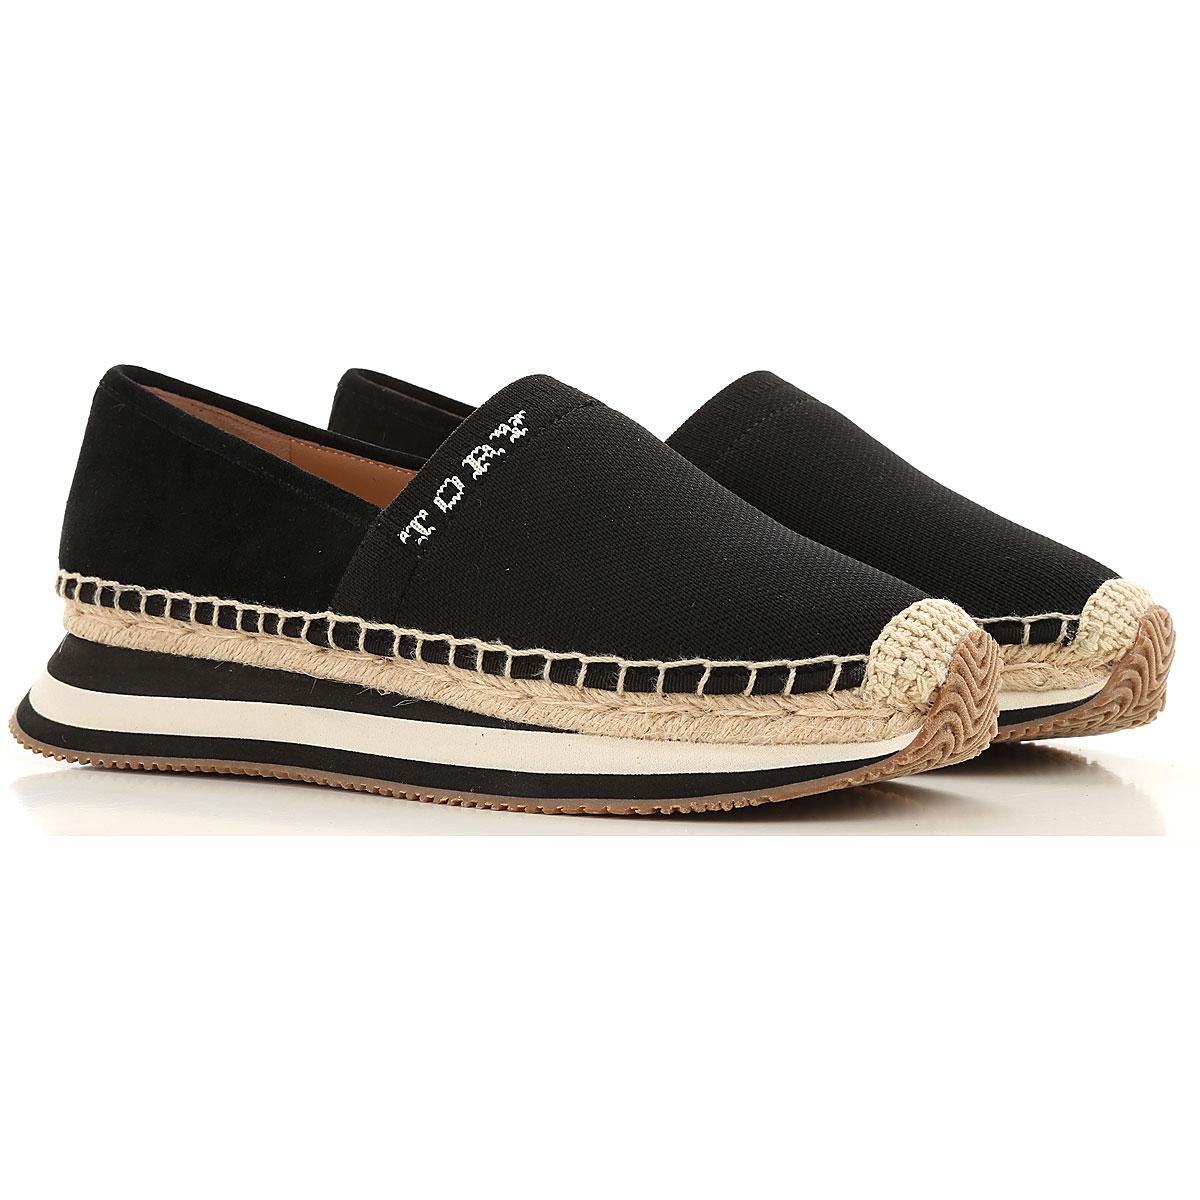 Tory Burch Slip On Sneakers For Women in Black - Save 50% - Lyst